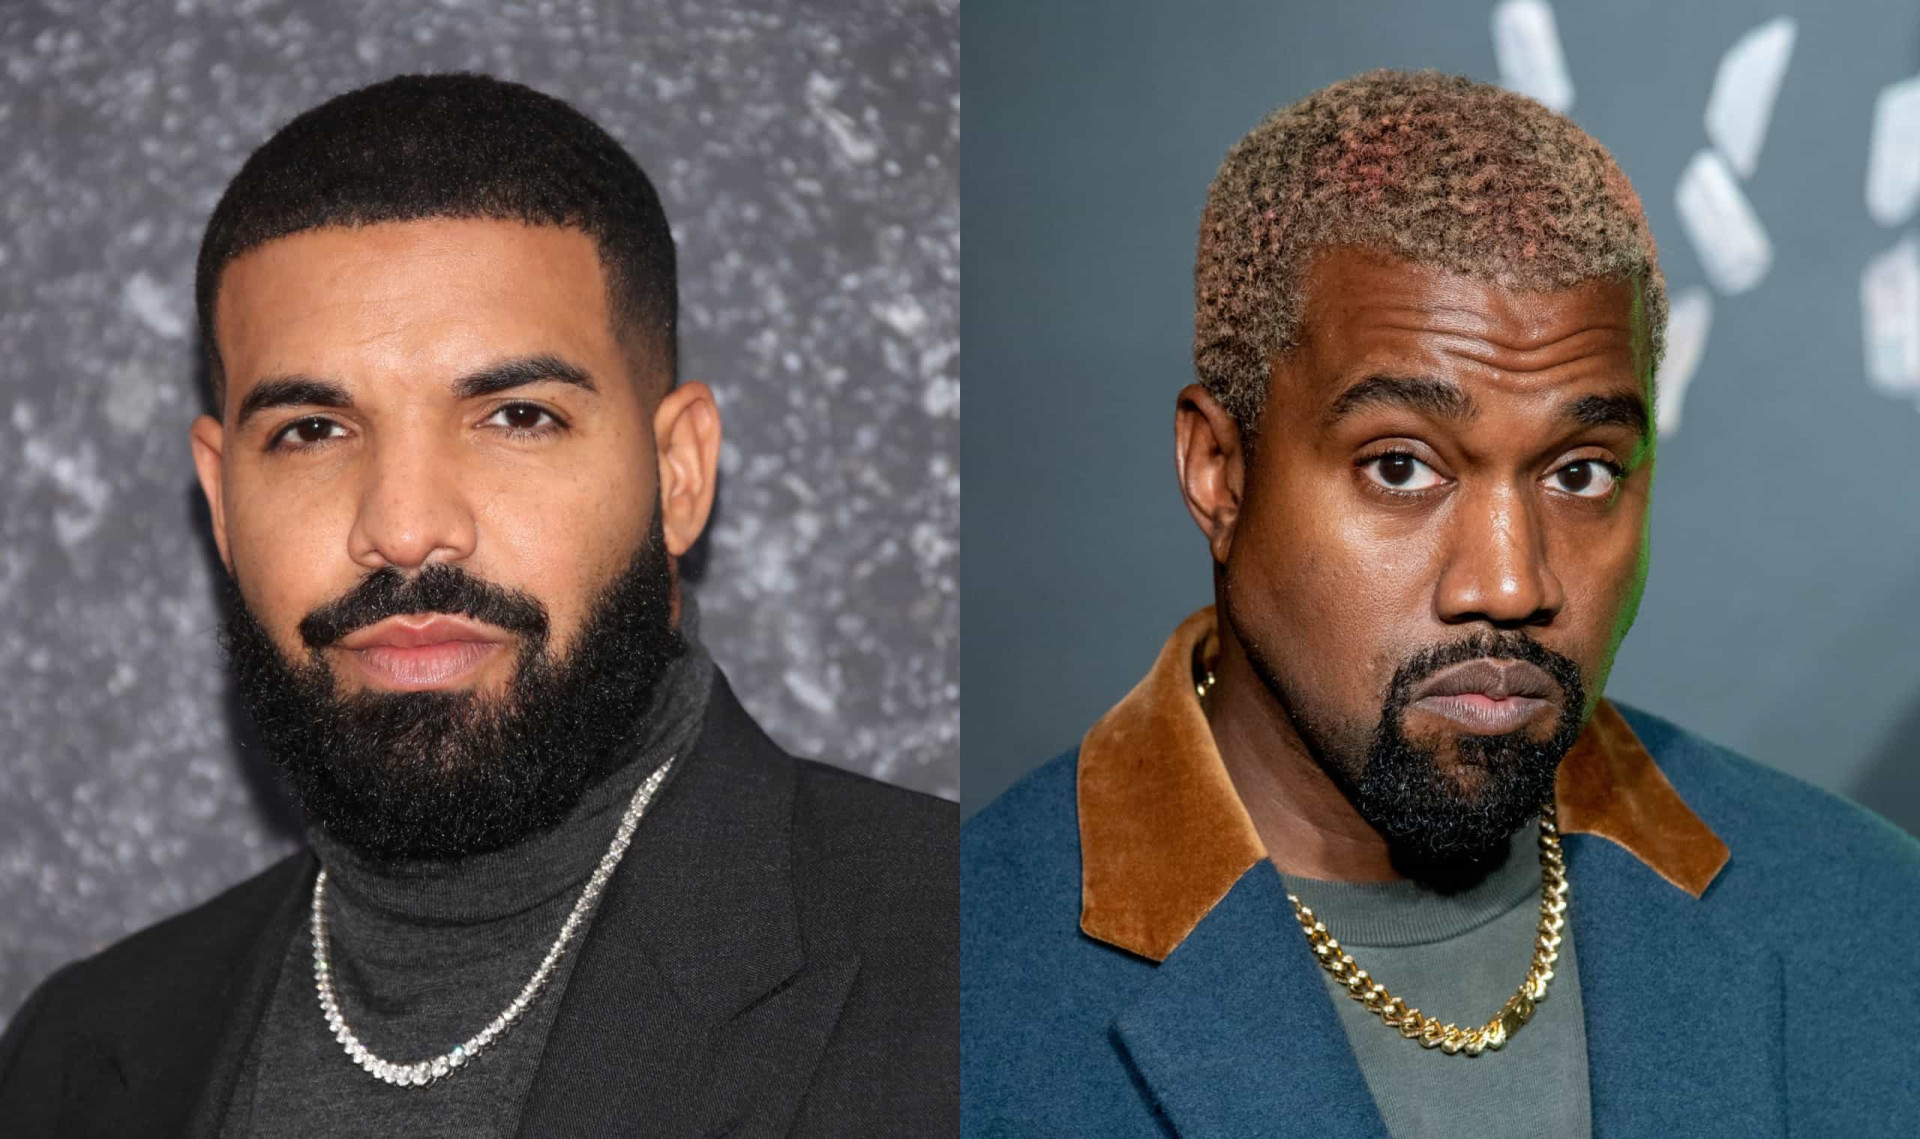 <p>Drake and Kanye "Ye" West's feud seemed to have ended in 2021 after a period of quiet, but Drake went on to mock his old adversary in 2023. During an episode of Sound 42’s 'The Fry Yiy Show' on SiriusXM Radio, the Canadian rapper previewed a track called 'Rescue Me' which includes a sample of Kim Kardashian discussing her divorce with Ye, in which she says, “I didn’t come this far, just to come this far and not be happy."</p><p>You may also like:<a href="https://www.starsinsider.com/n/310383?utm_source=msn.com&utm_medium=display&utm_campaign=referral_description&utm_content=570915en-en"> McDonald's most expensive and cheapest locations in the world</a></p>